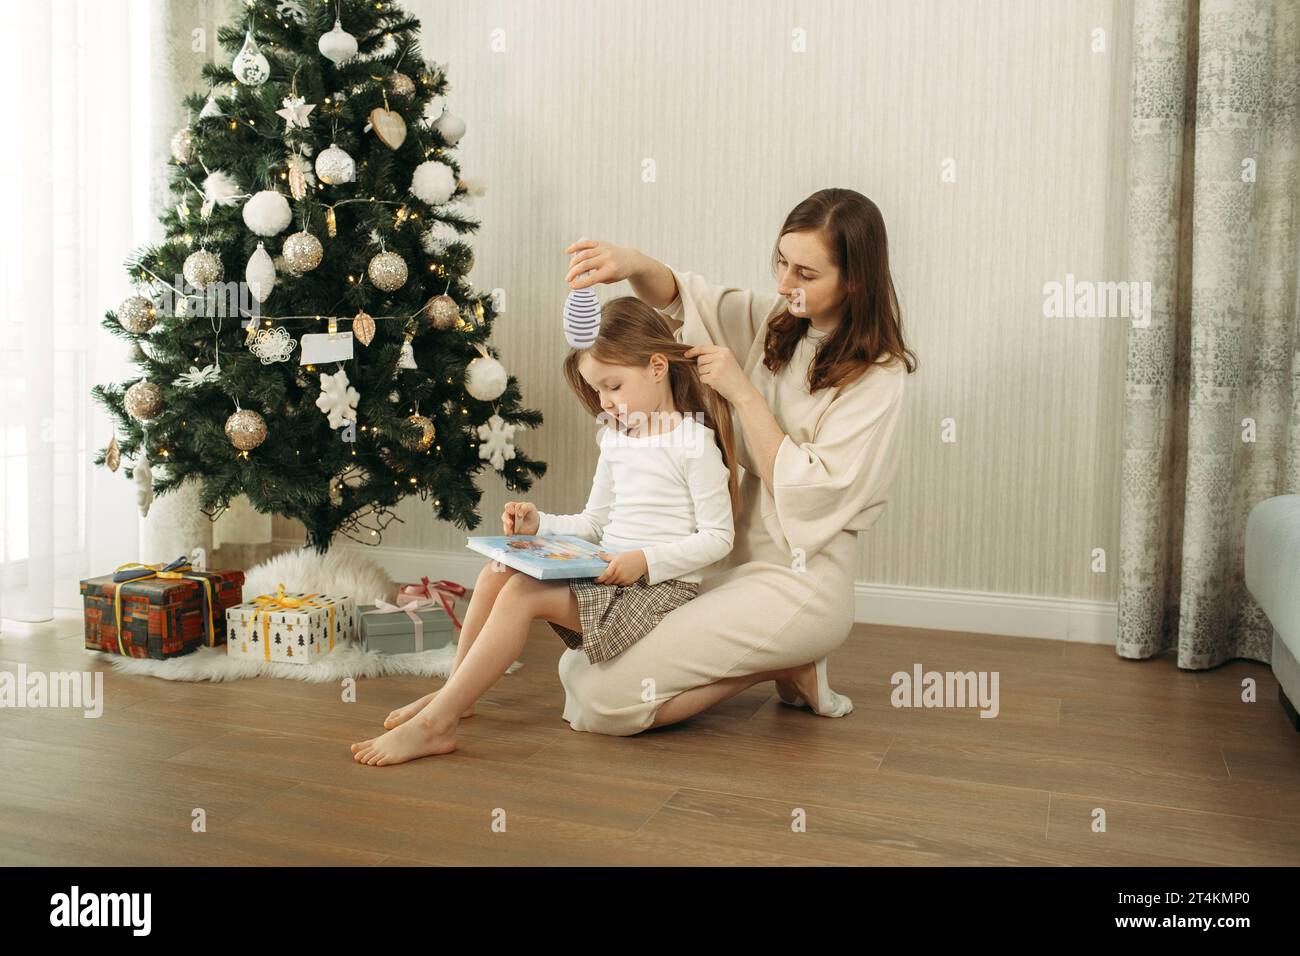 Mom combs her daughter's hair while sitting on the floor near the Christmas tree. Tender relationship between mother and daughter Stock Photo